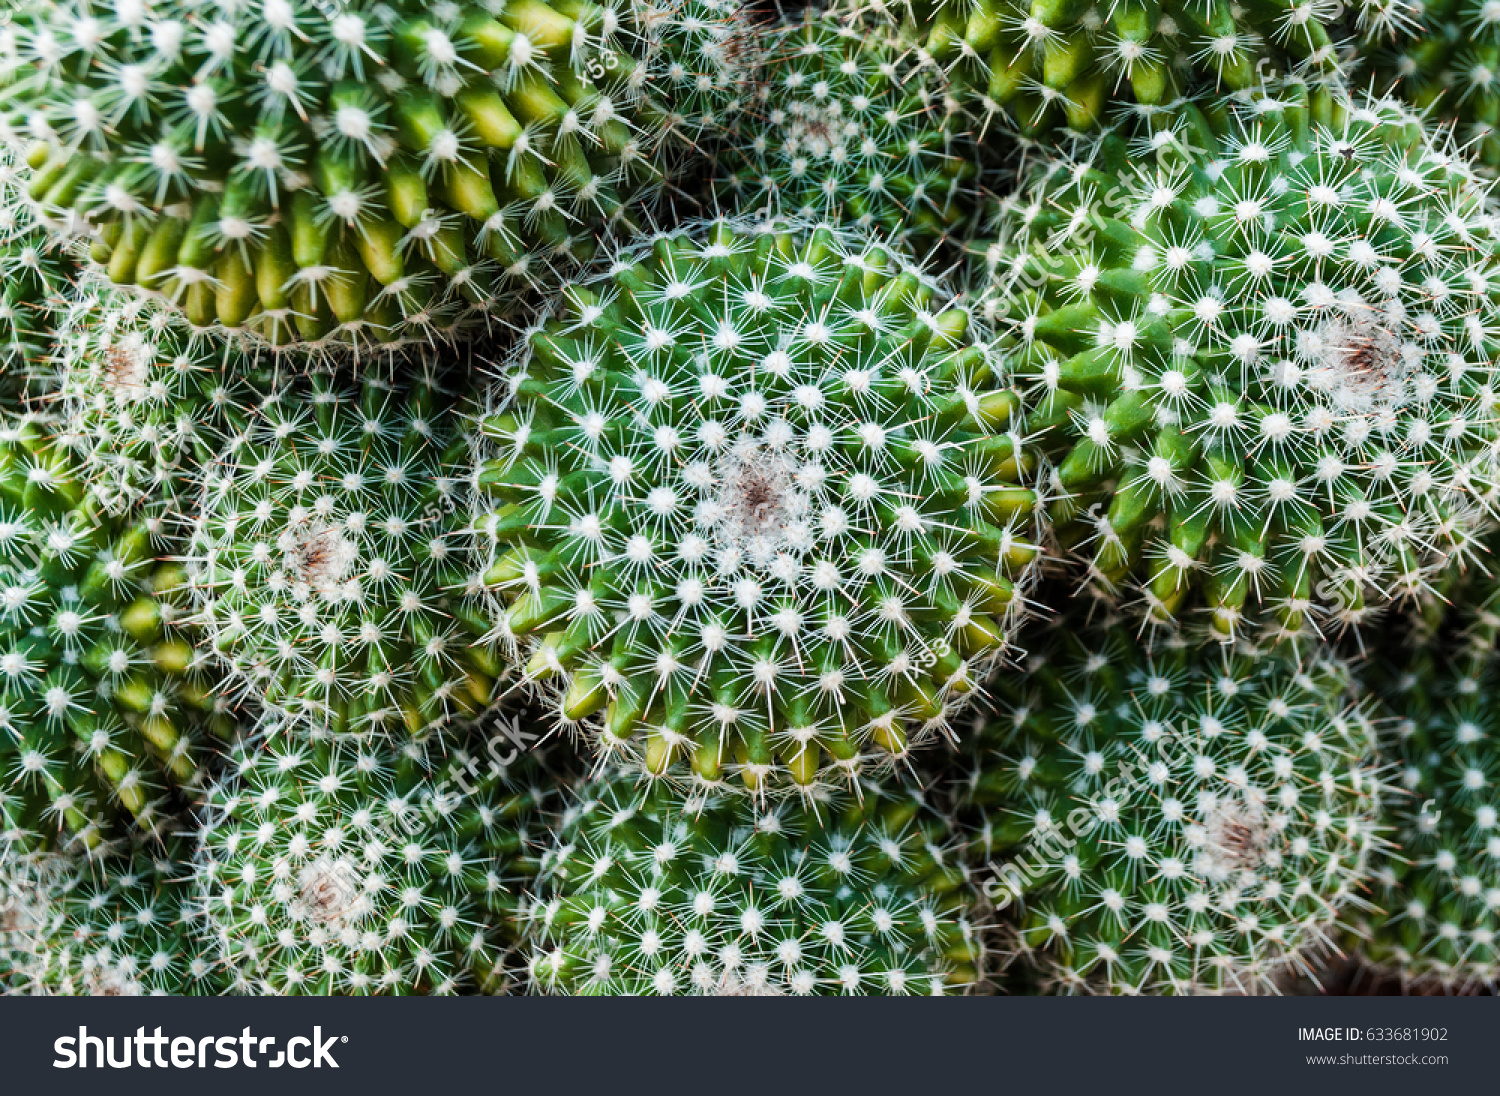 Selective focus close-up top-view shot on Golden barrel cactus (Echinocactus grusonii) cluster. well known species of cactus, endemic to east-central Mexico widely cultivated as an ornamental plant. #633681902